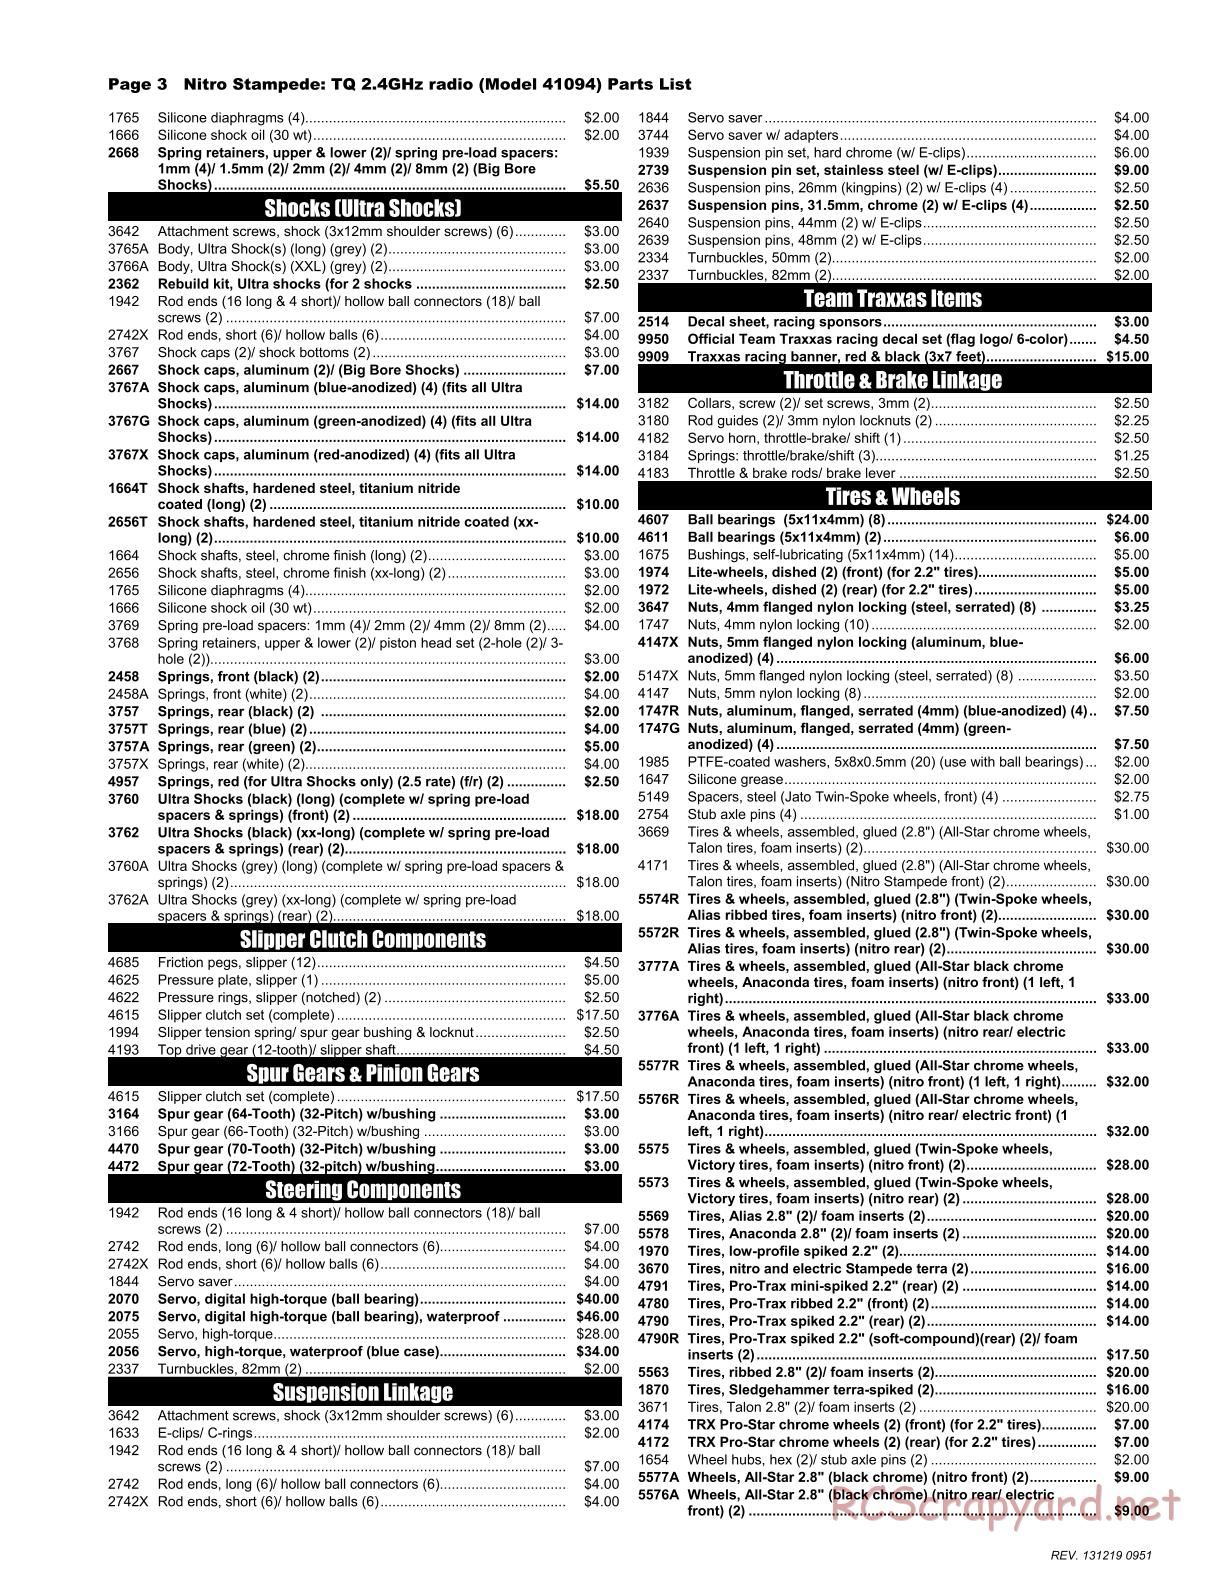 Traxxas - Nitro Stampede (2013) - Parts List - Page 3